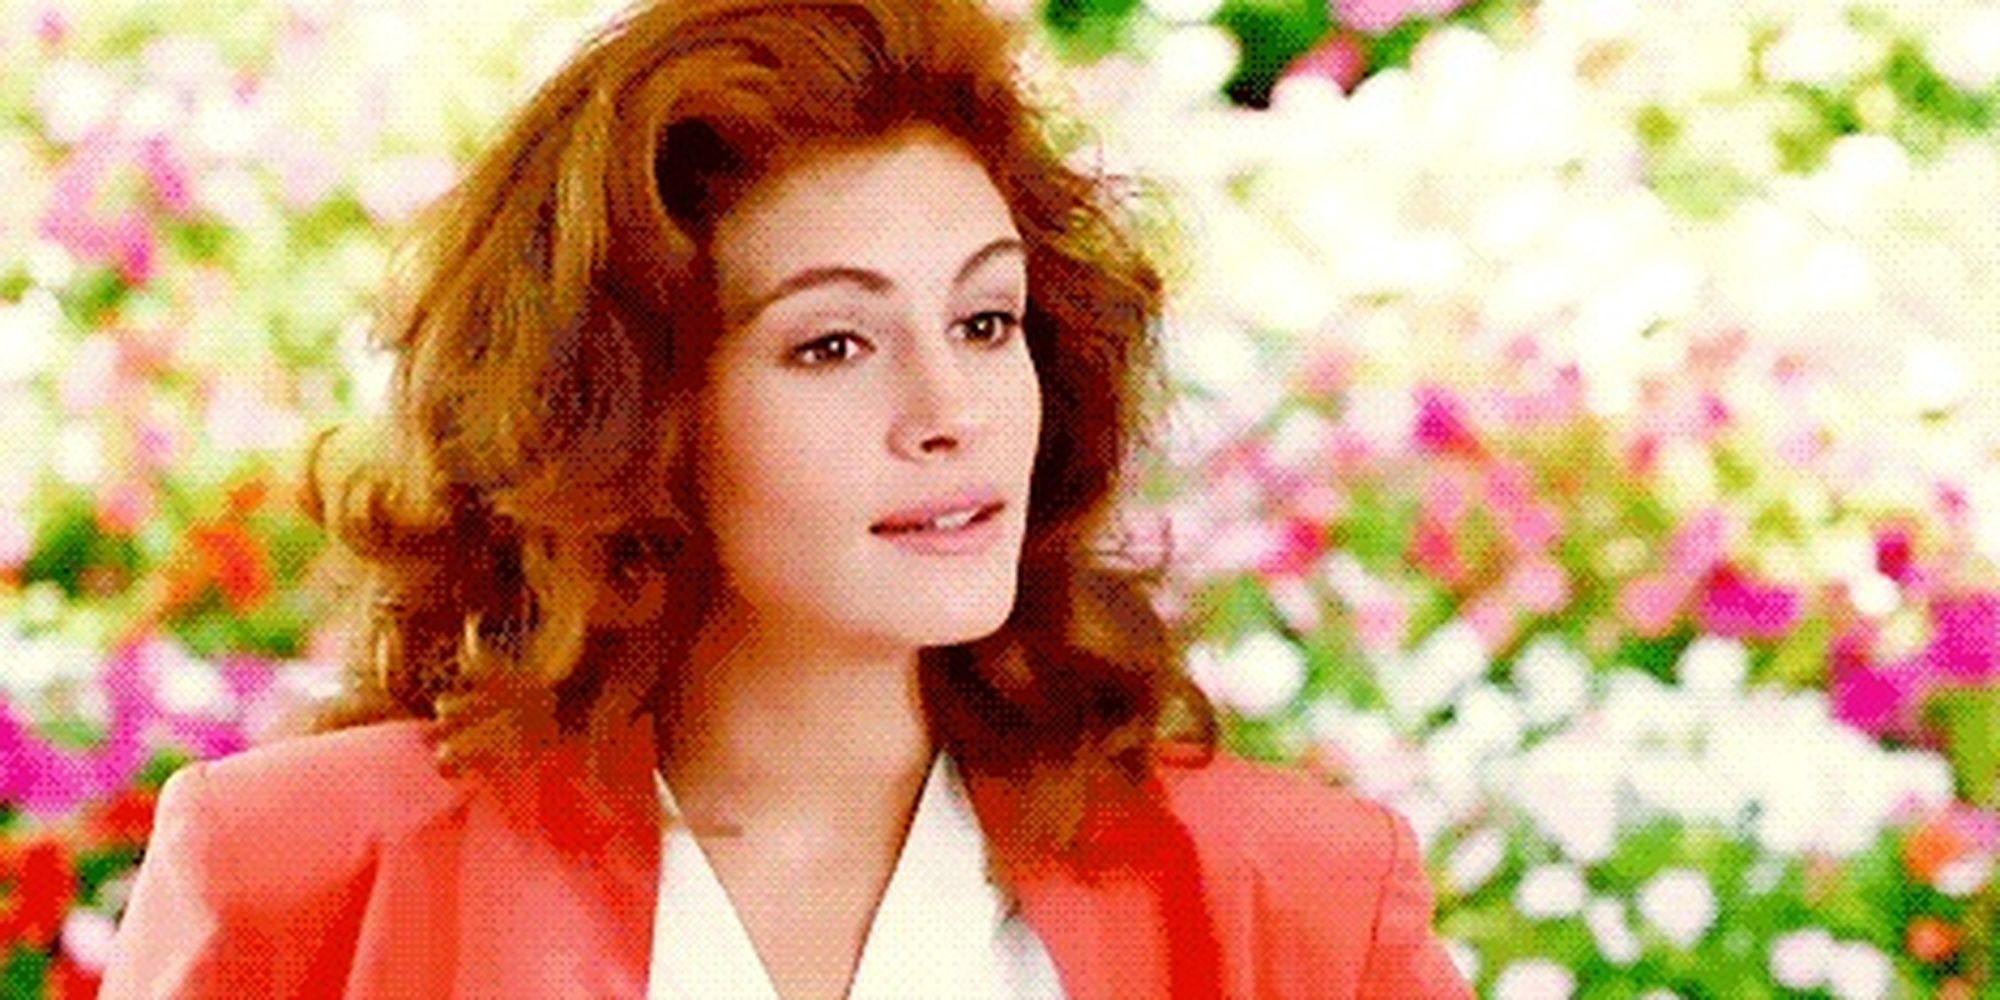 10 Things From Pretty Woman That Have Aged Poorly